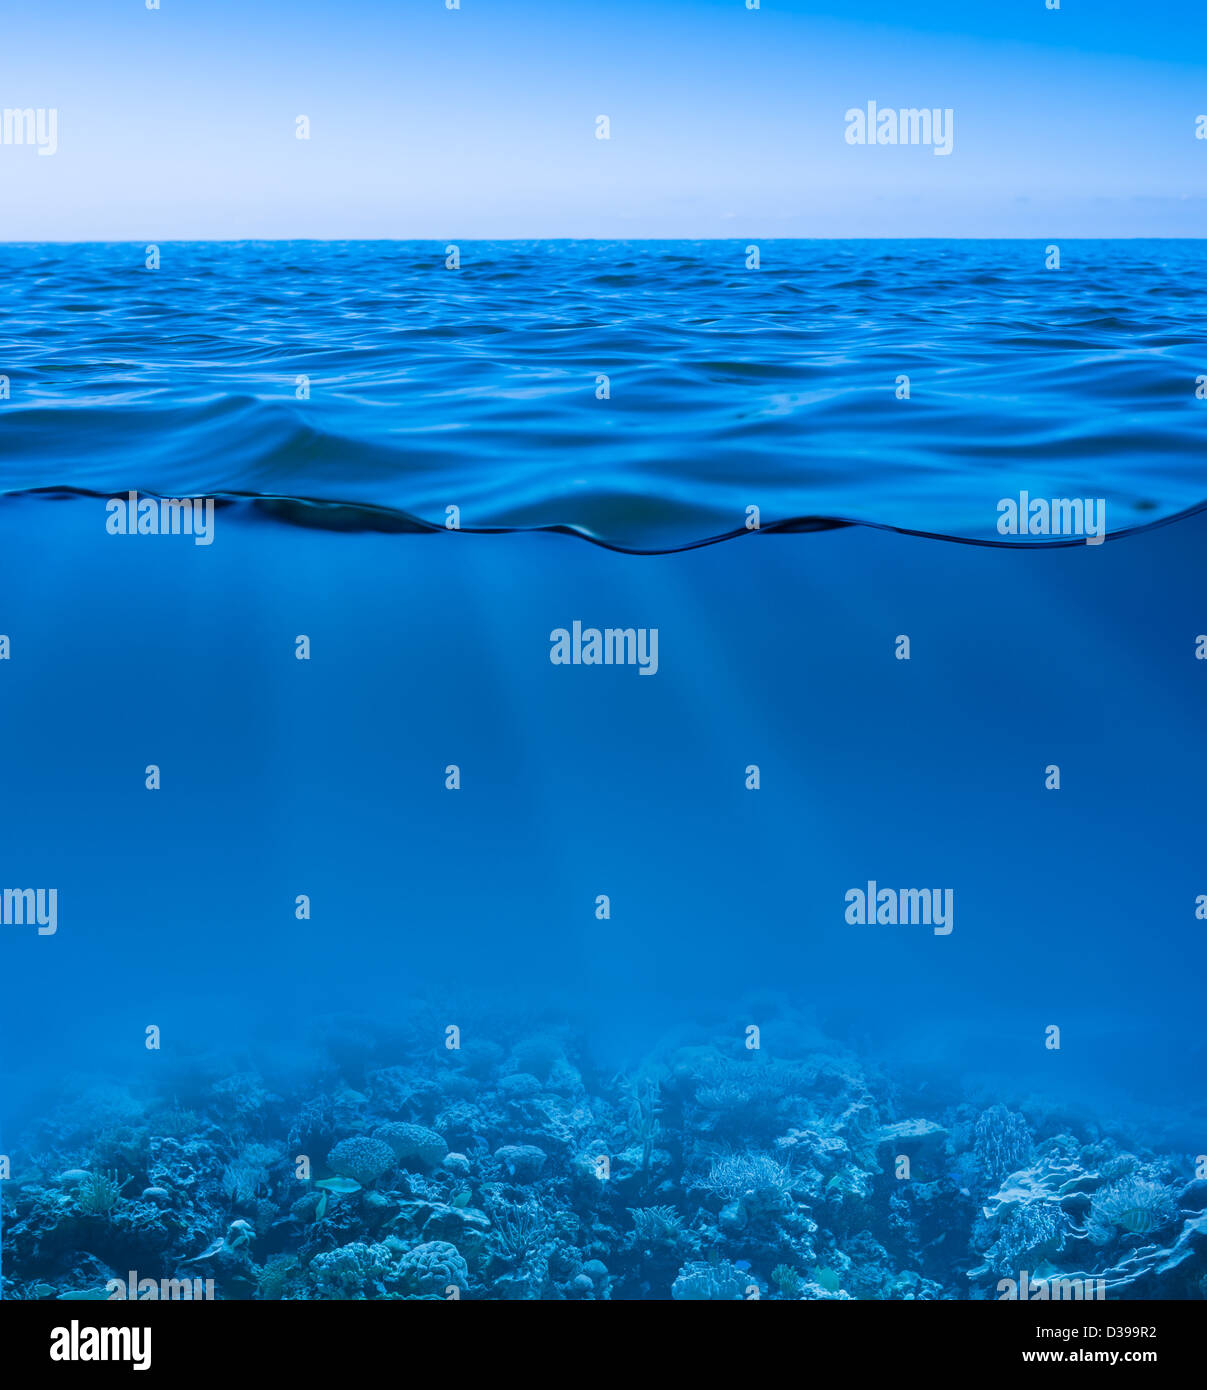 still calm sea water surface with clear sky and underwater world discovered Stock Photo